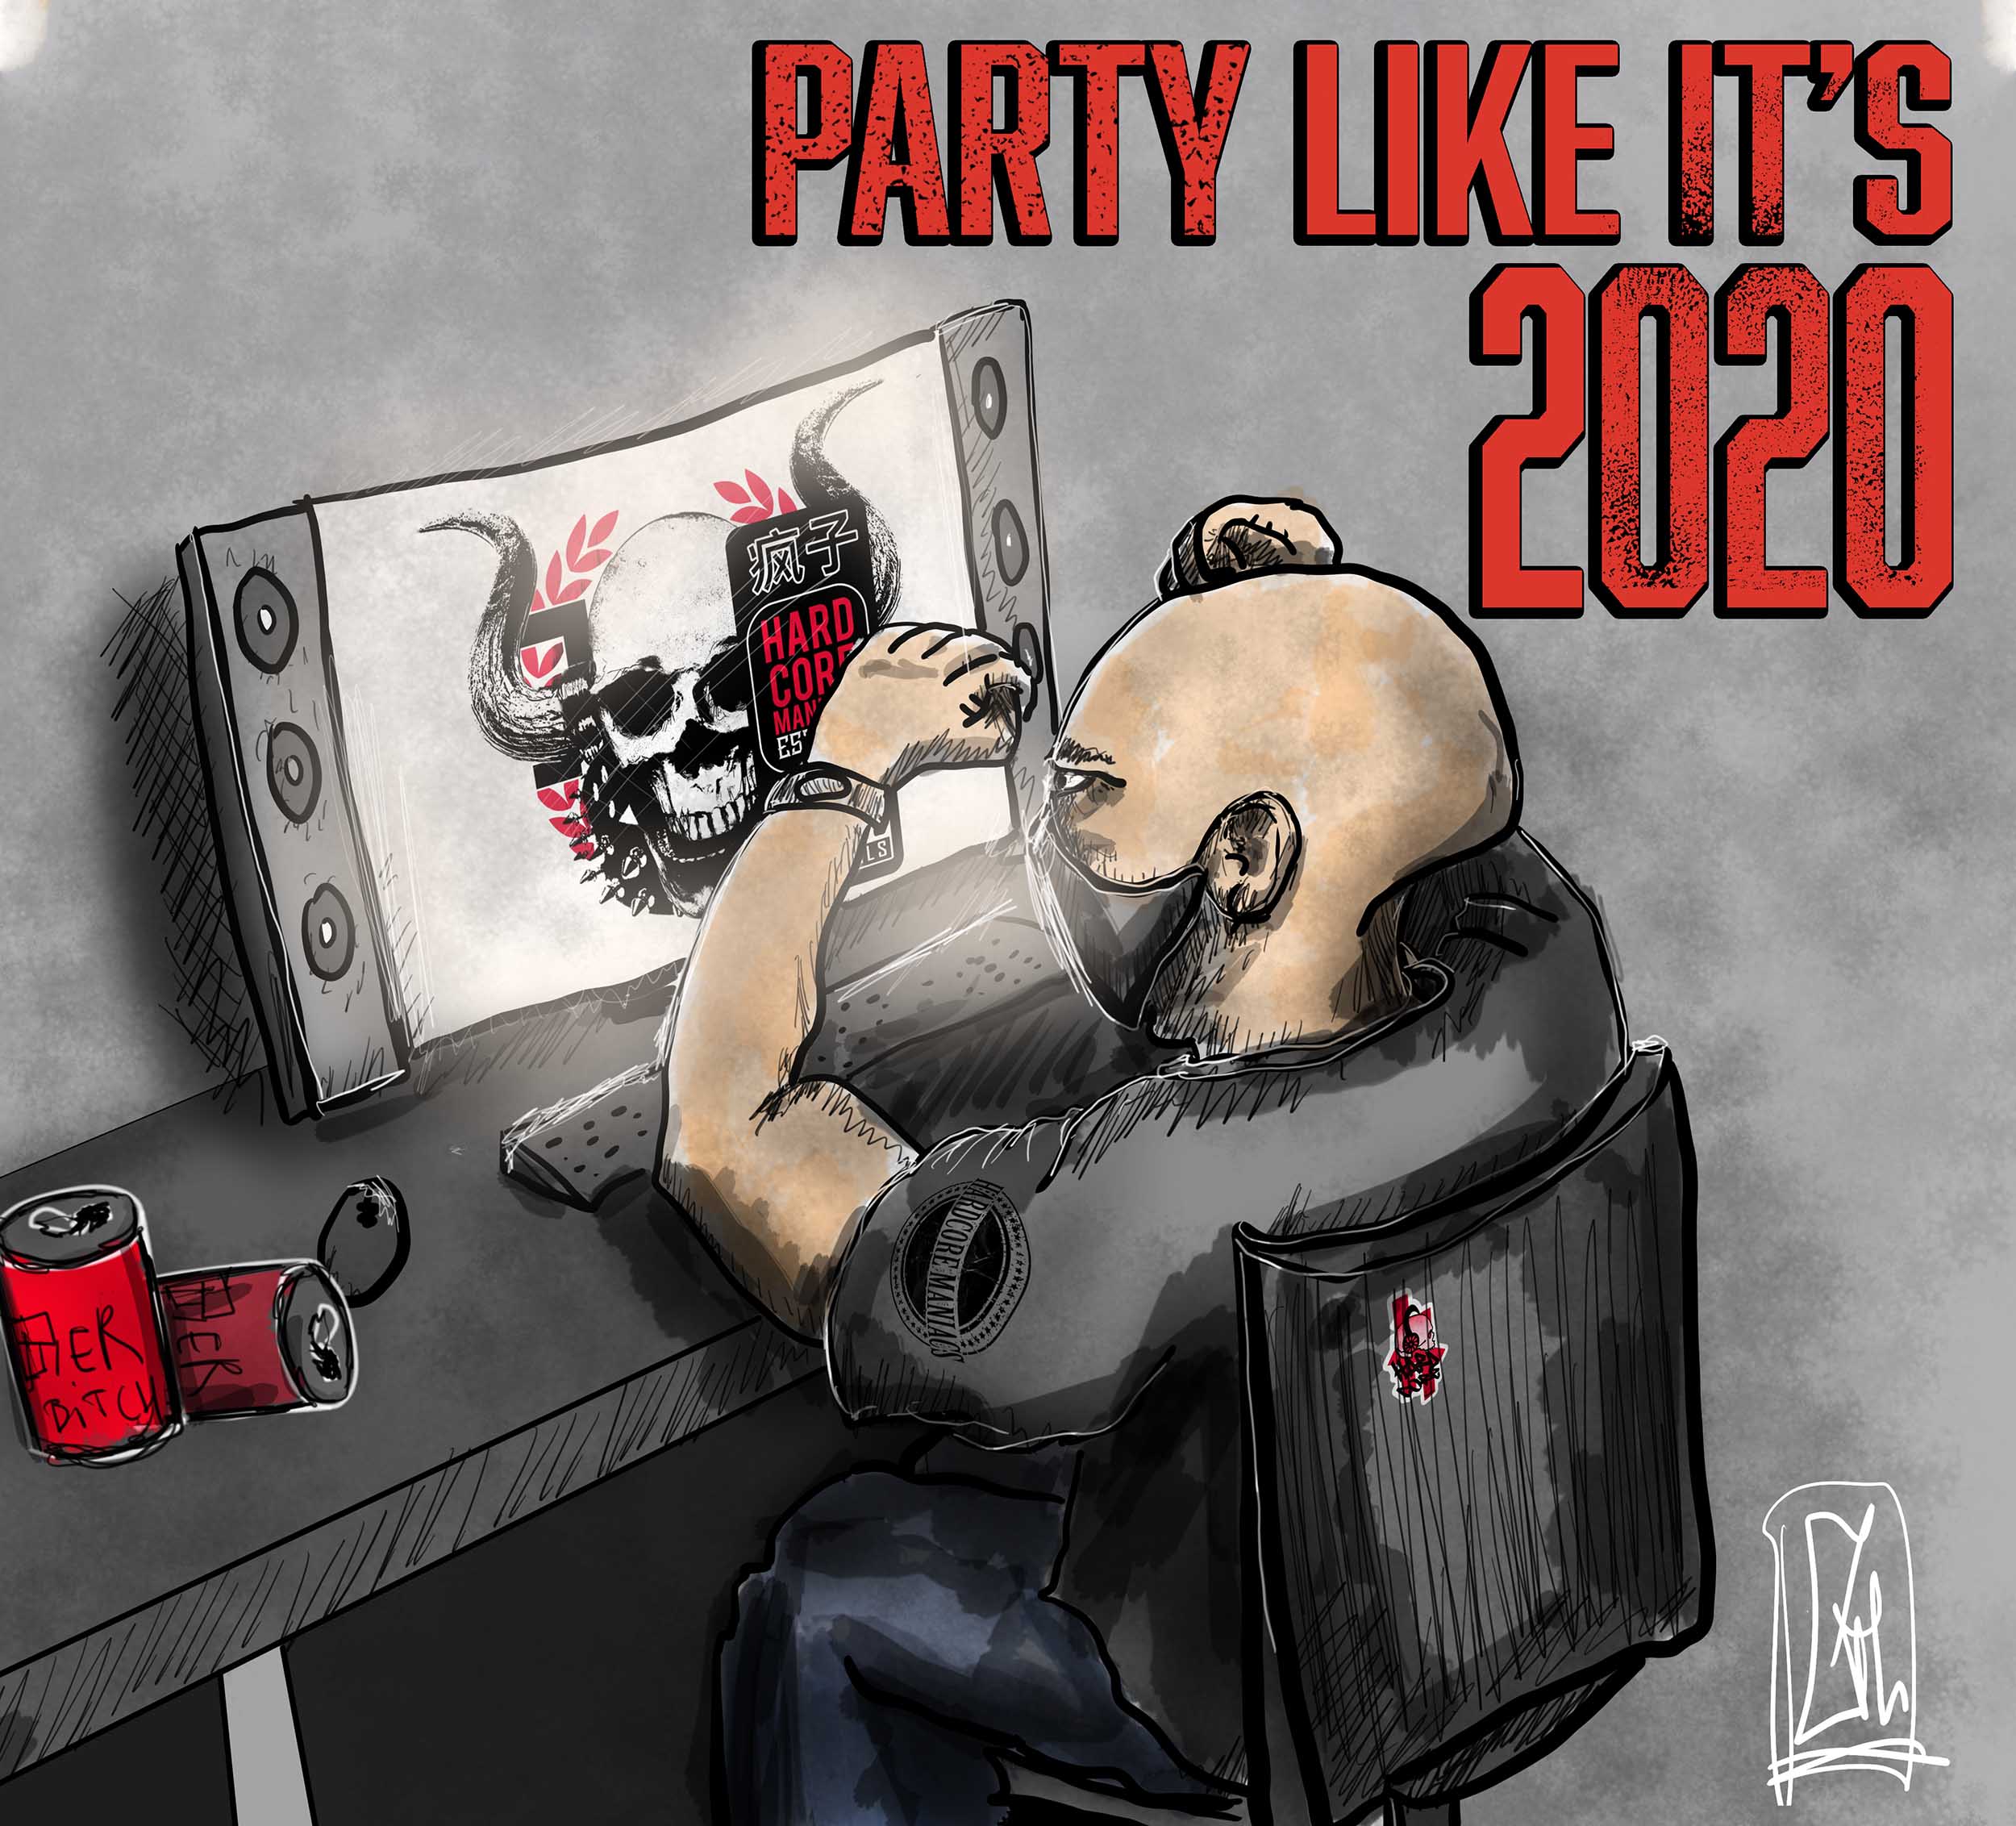 The Ultimate 2020 Lockdown party